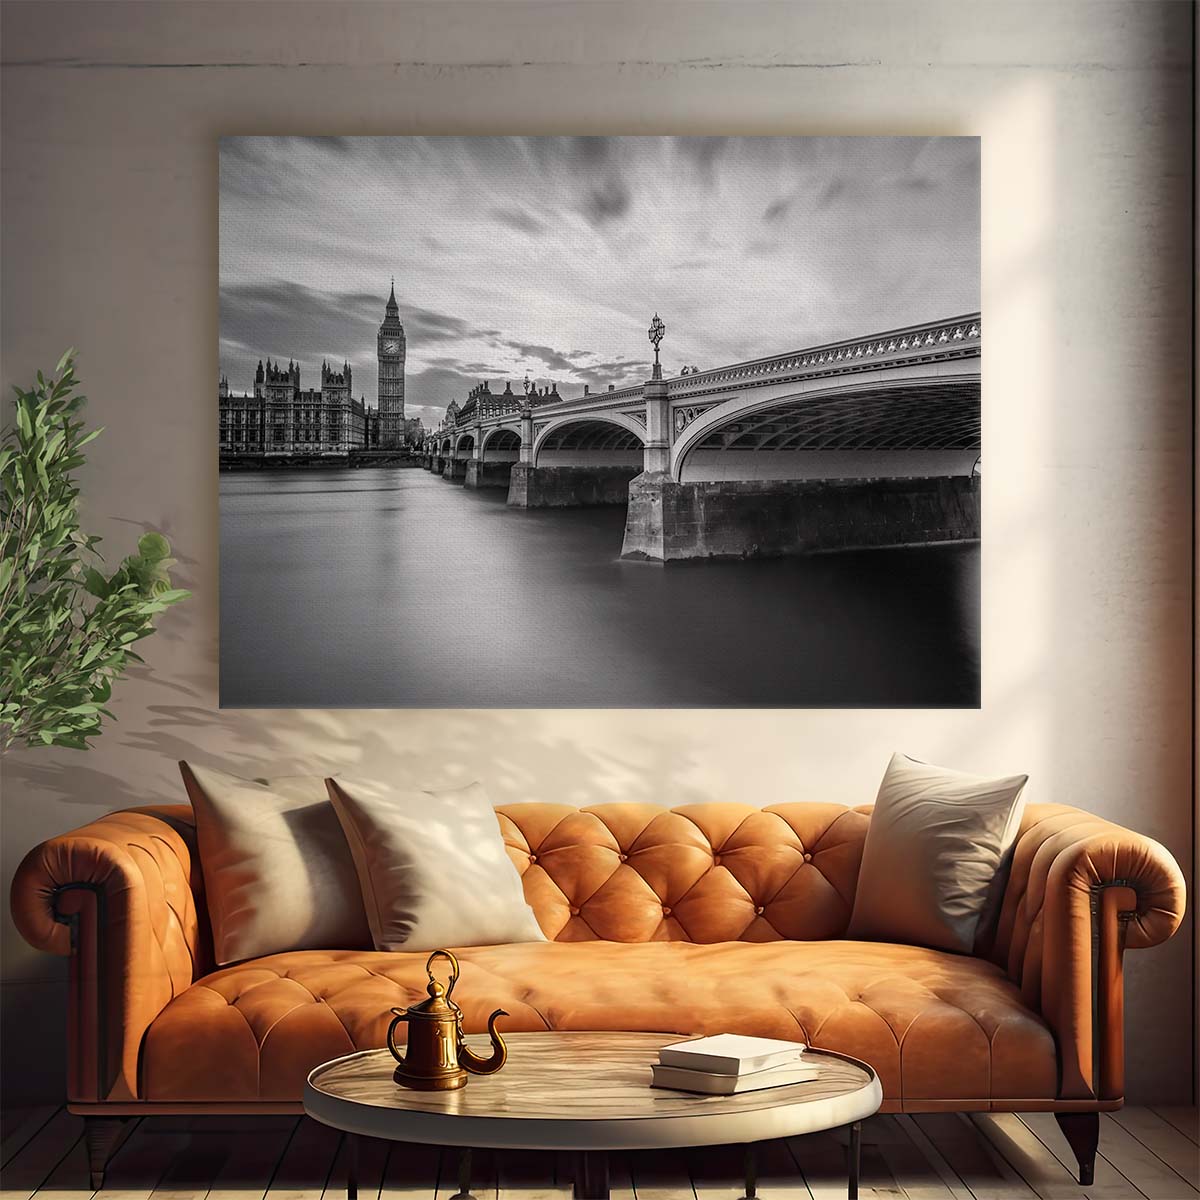 Iconic London Skyline & Big Ben Monochrome Wall Art by Luxuriance Designs. Made in USA.